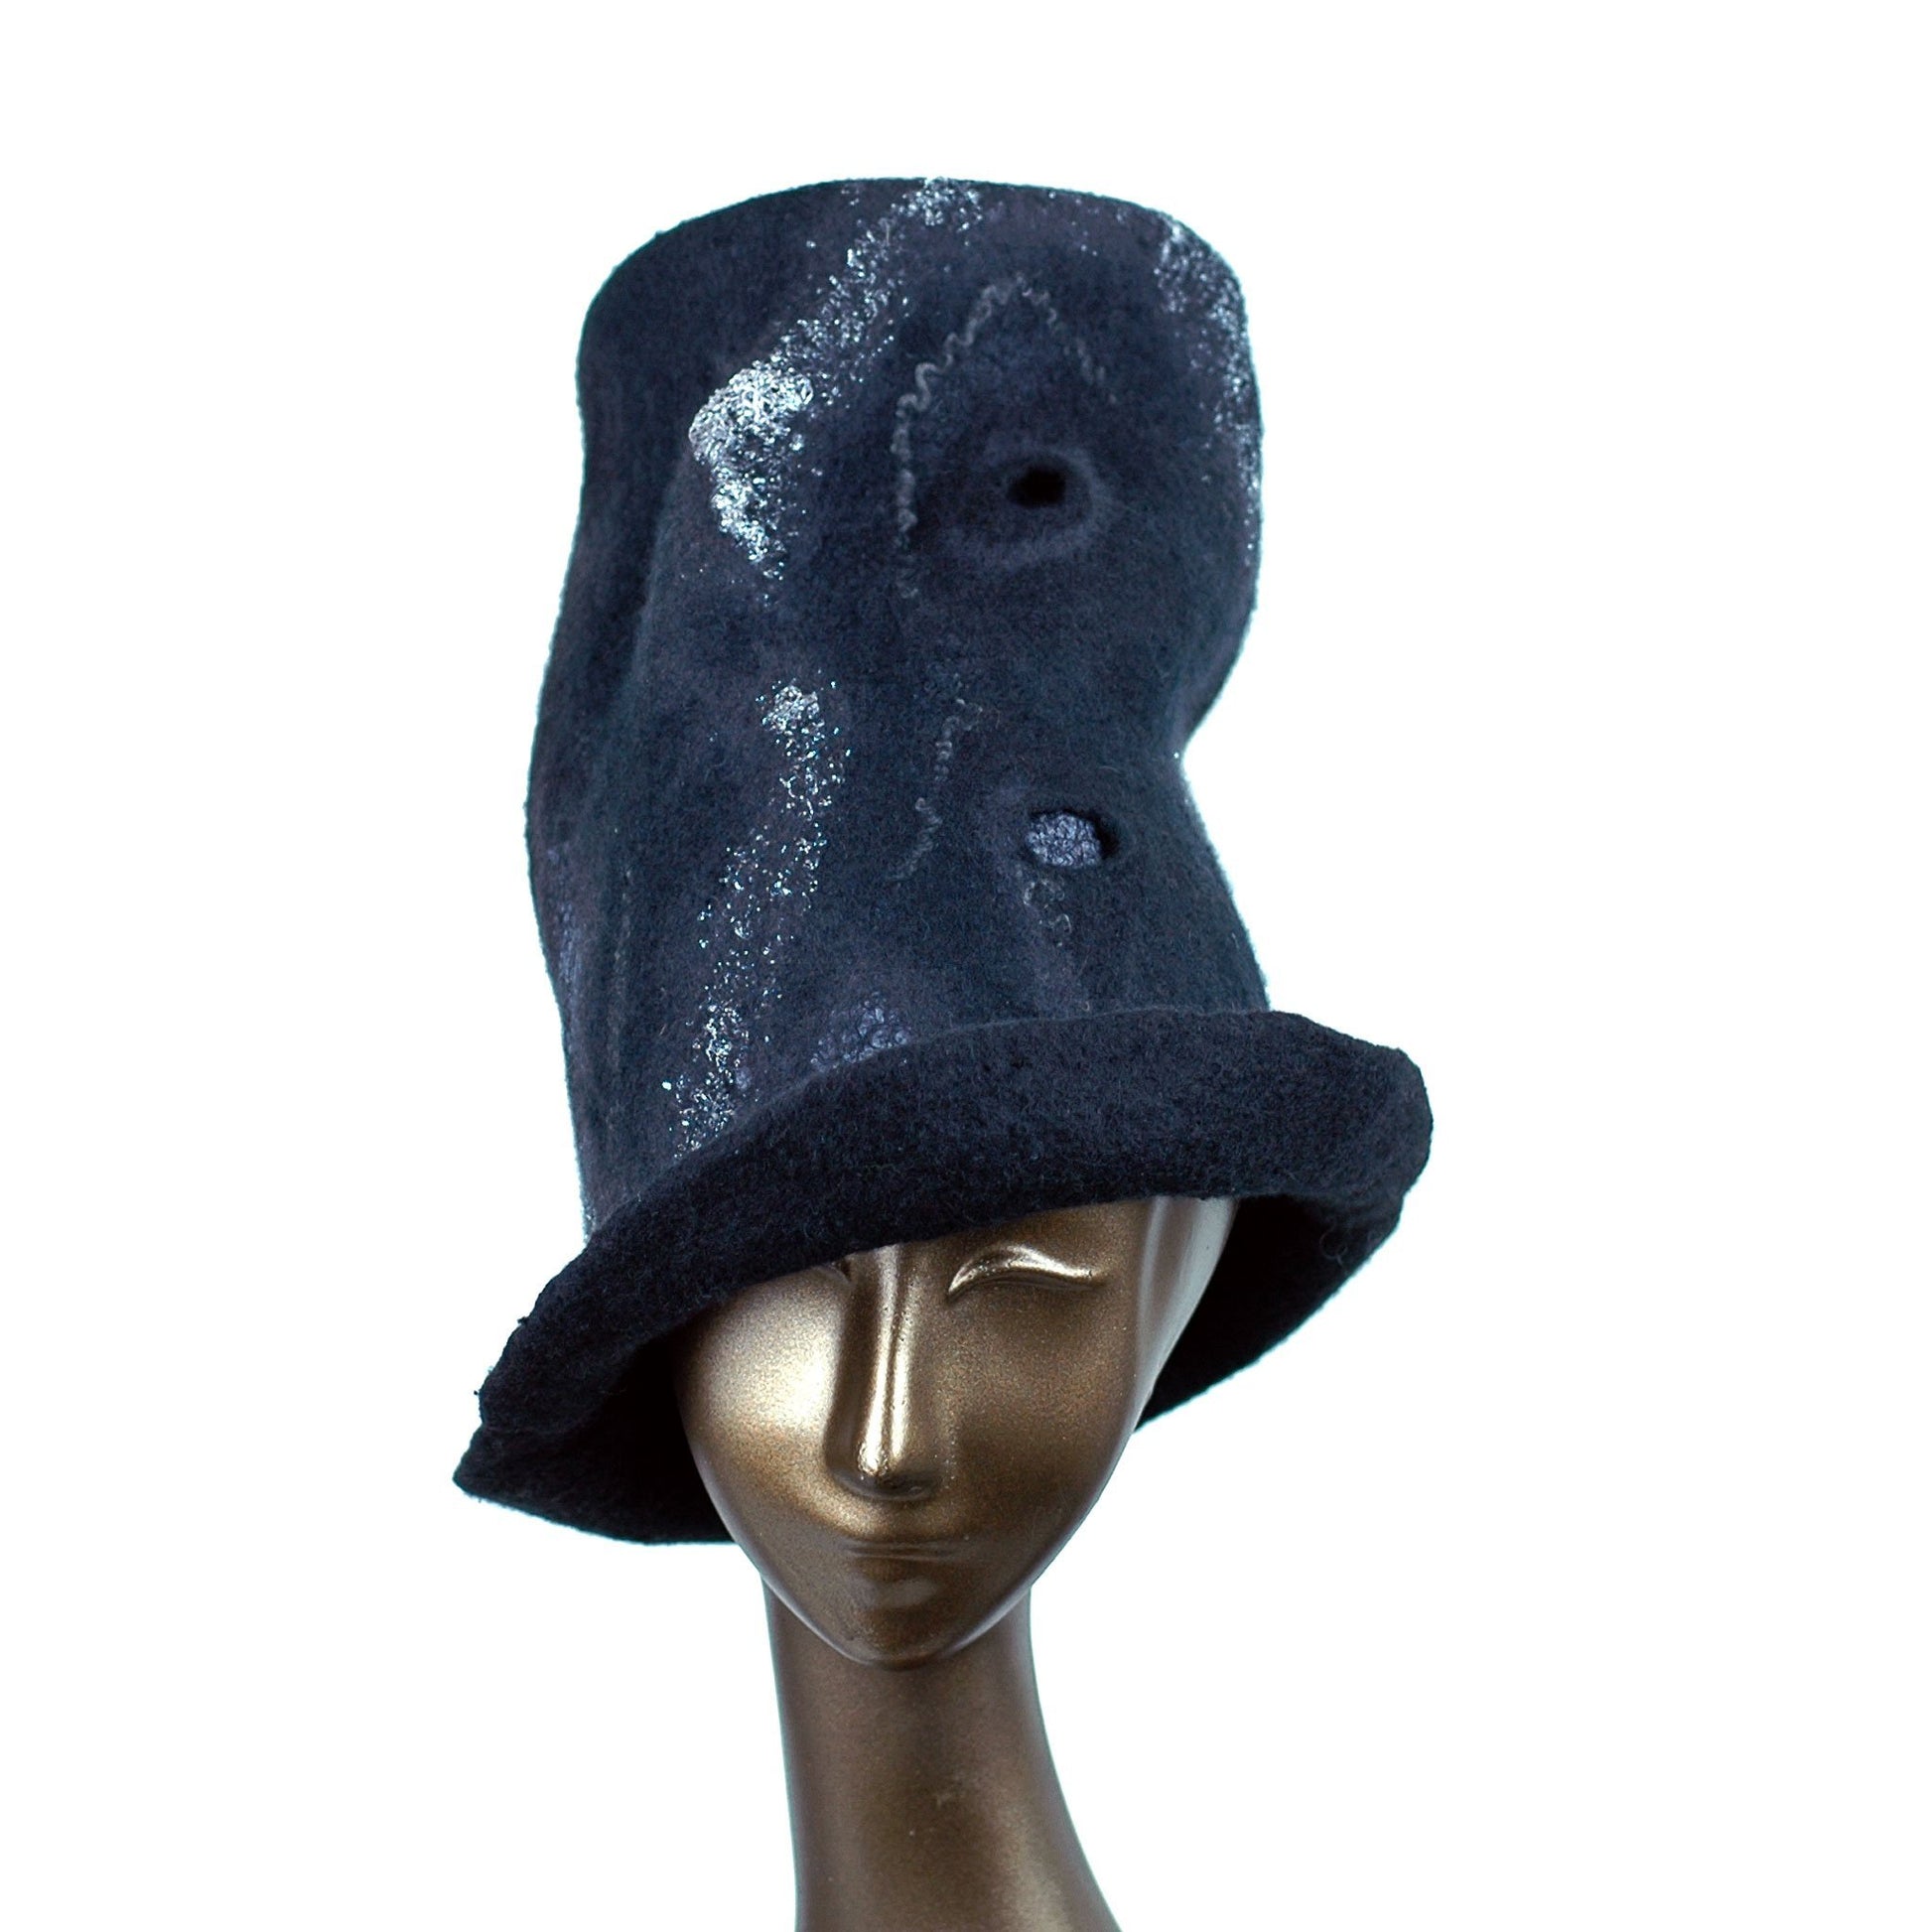 Tall Black Top Hat with Silver Nunofelted Lace - front view